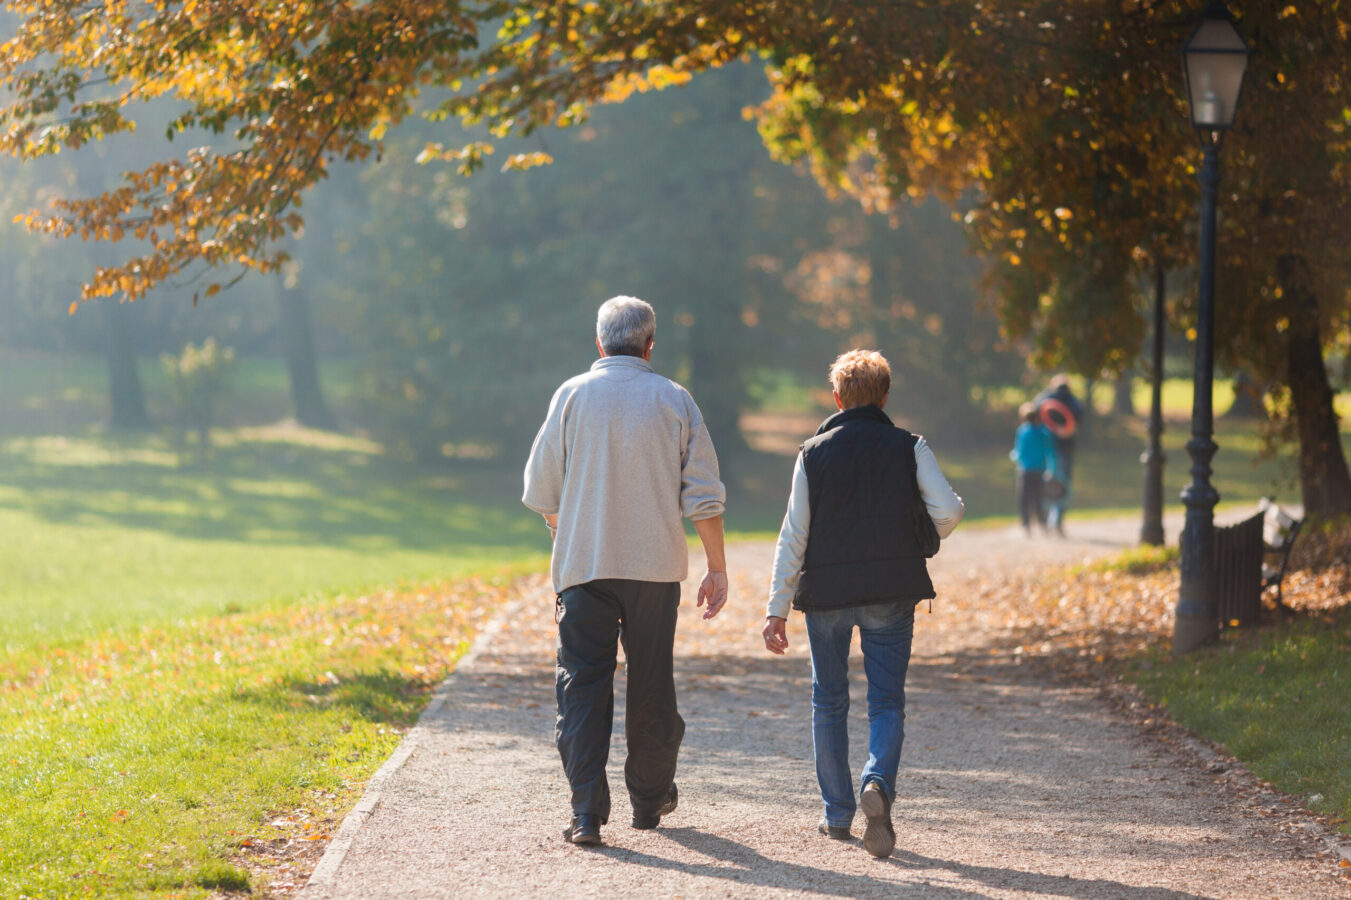 An elderly couple walks down a paved pathway in the fall, away from the camera.